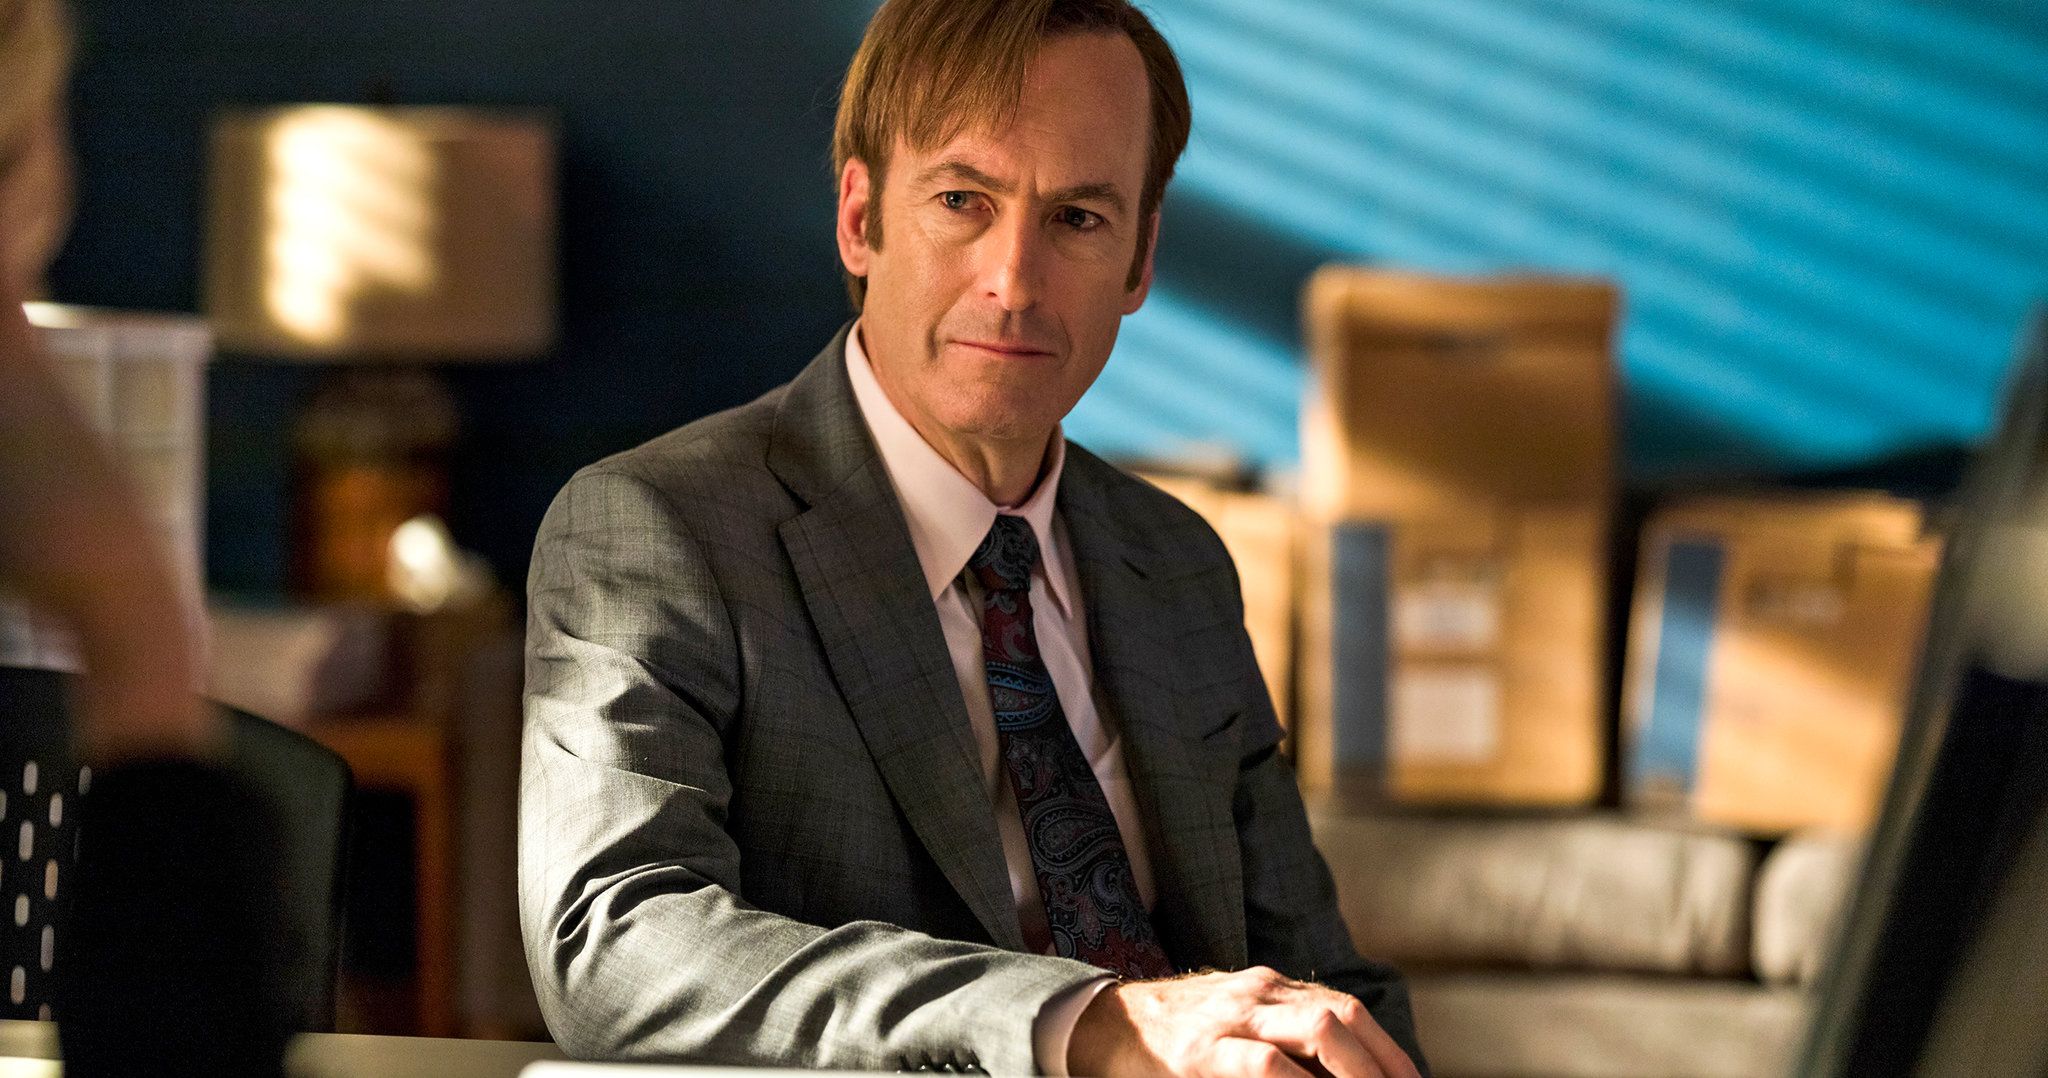 Bob Odenkirk Breaks Silence After Heart Attack: I'll Be Back Soon